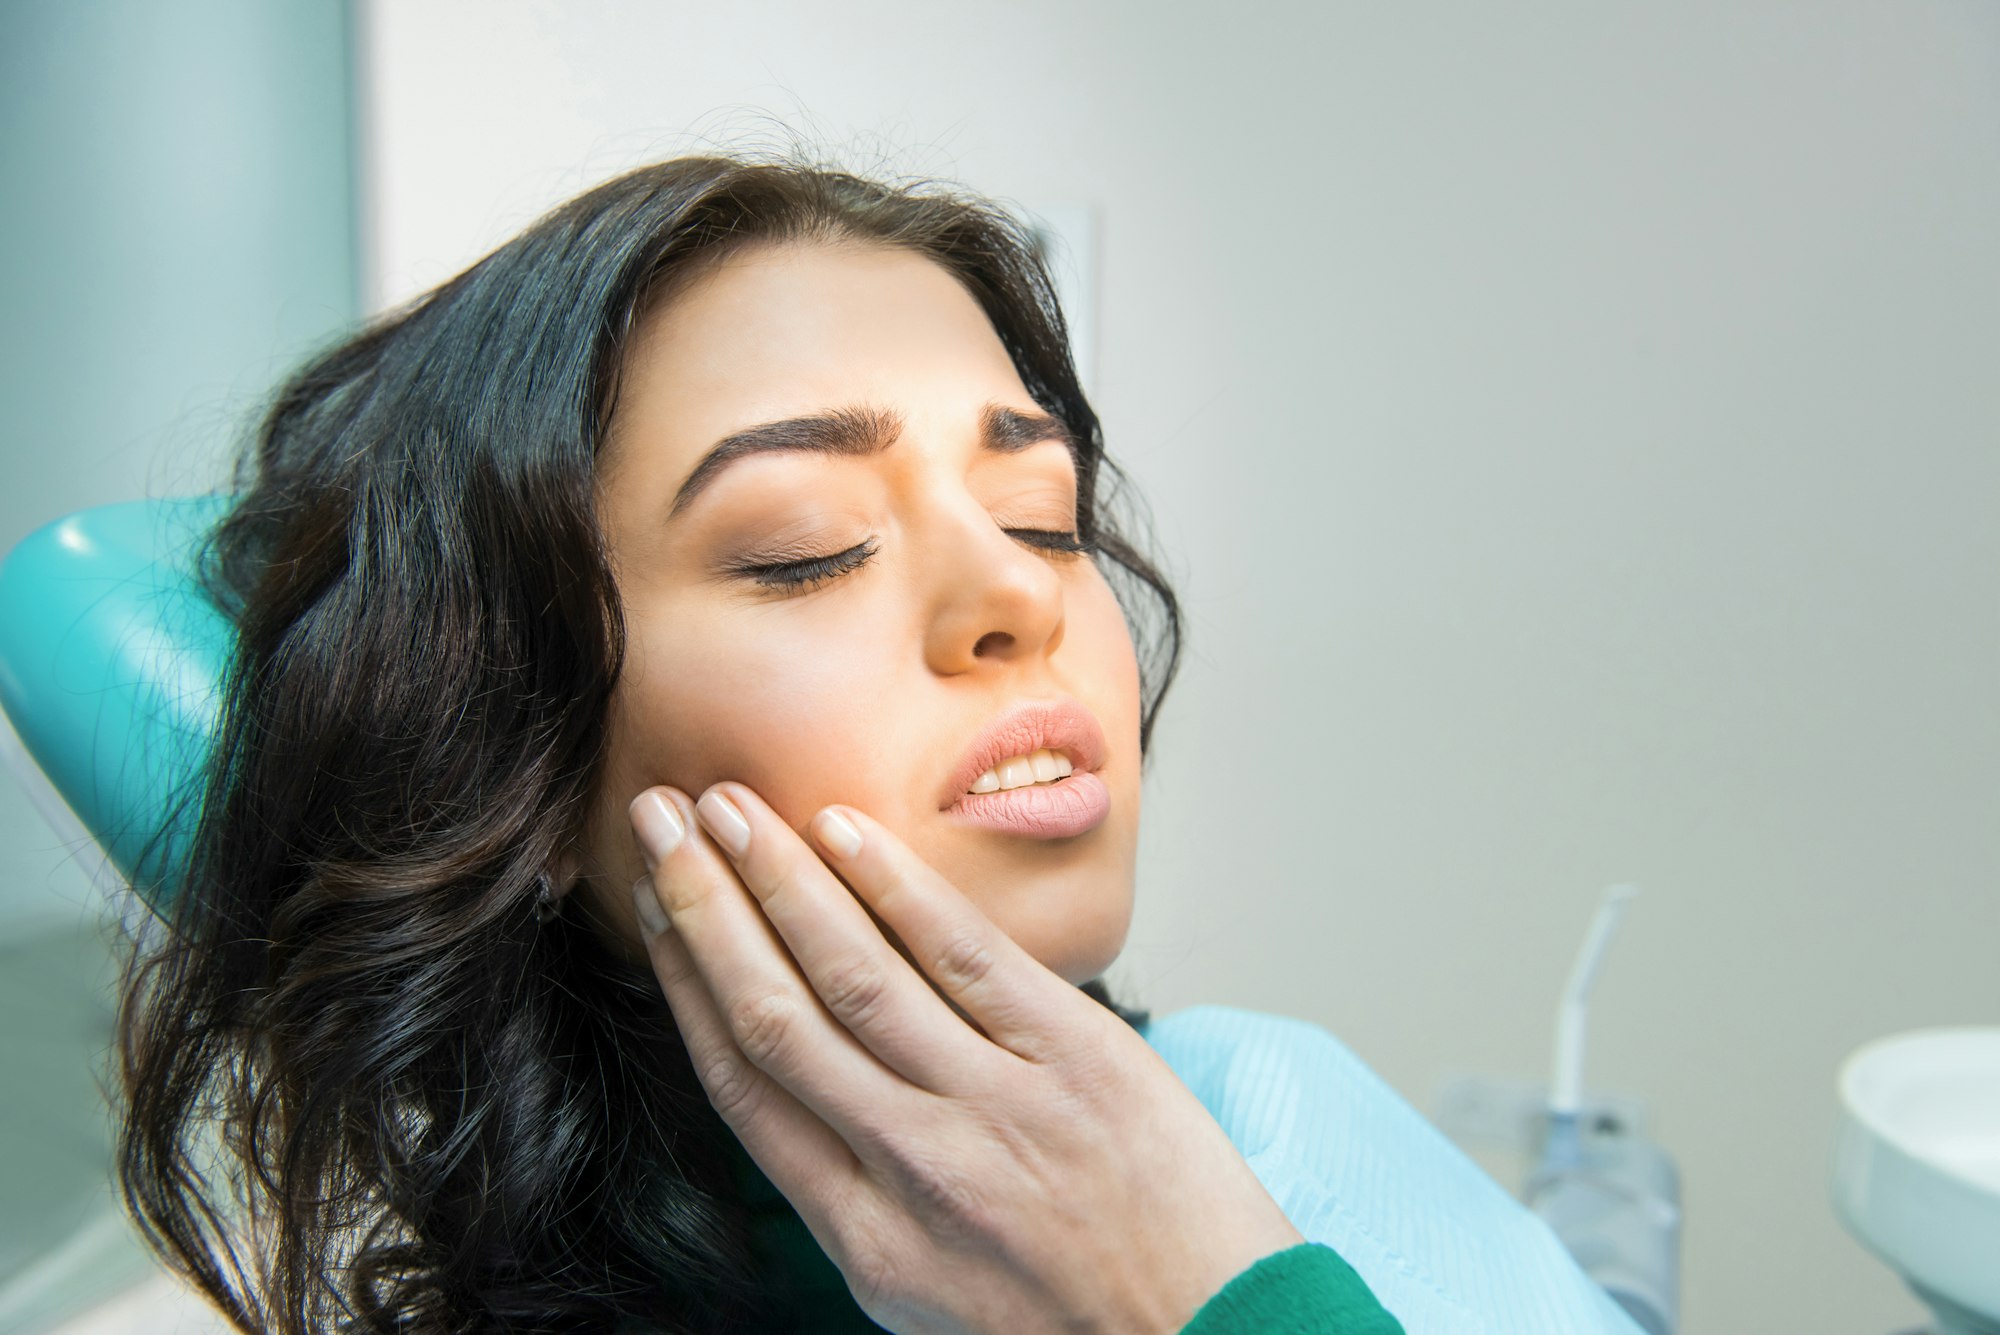 Young woman rubbing her jaw while in a dental chair, showing the pain associated with Gum Disease treated at Schlueter Periodontics.